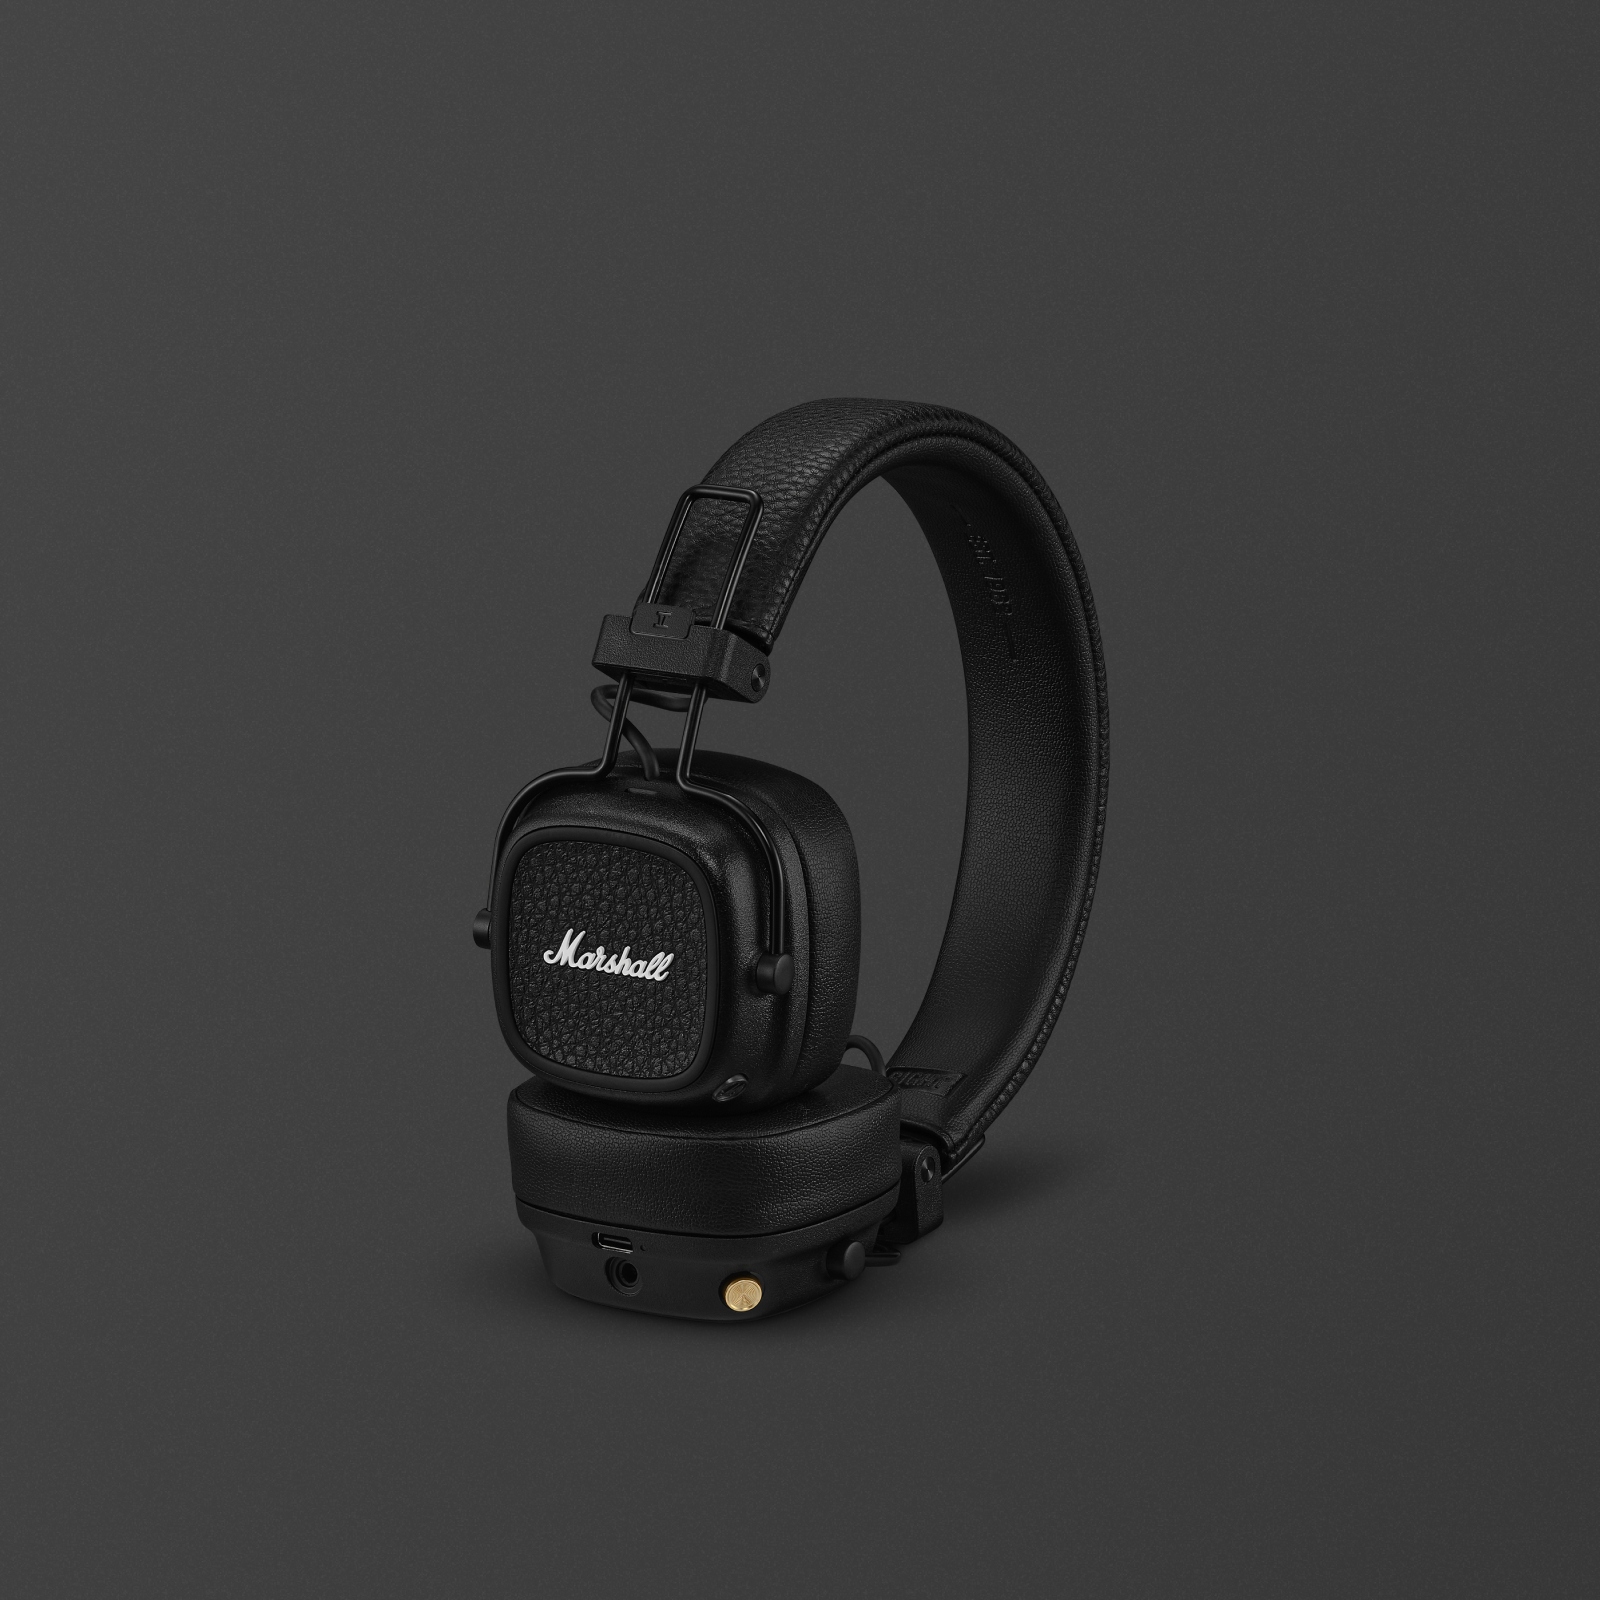 Marshall headphones for front-row sound wherever you are 